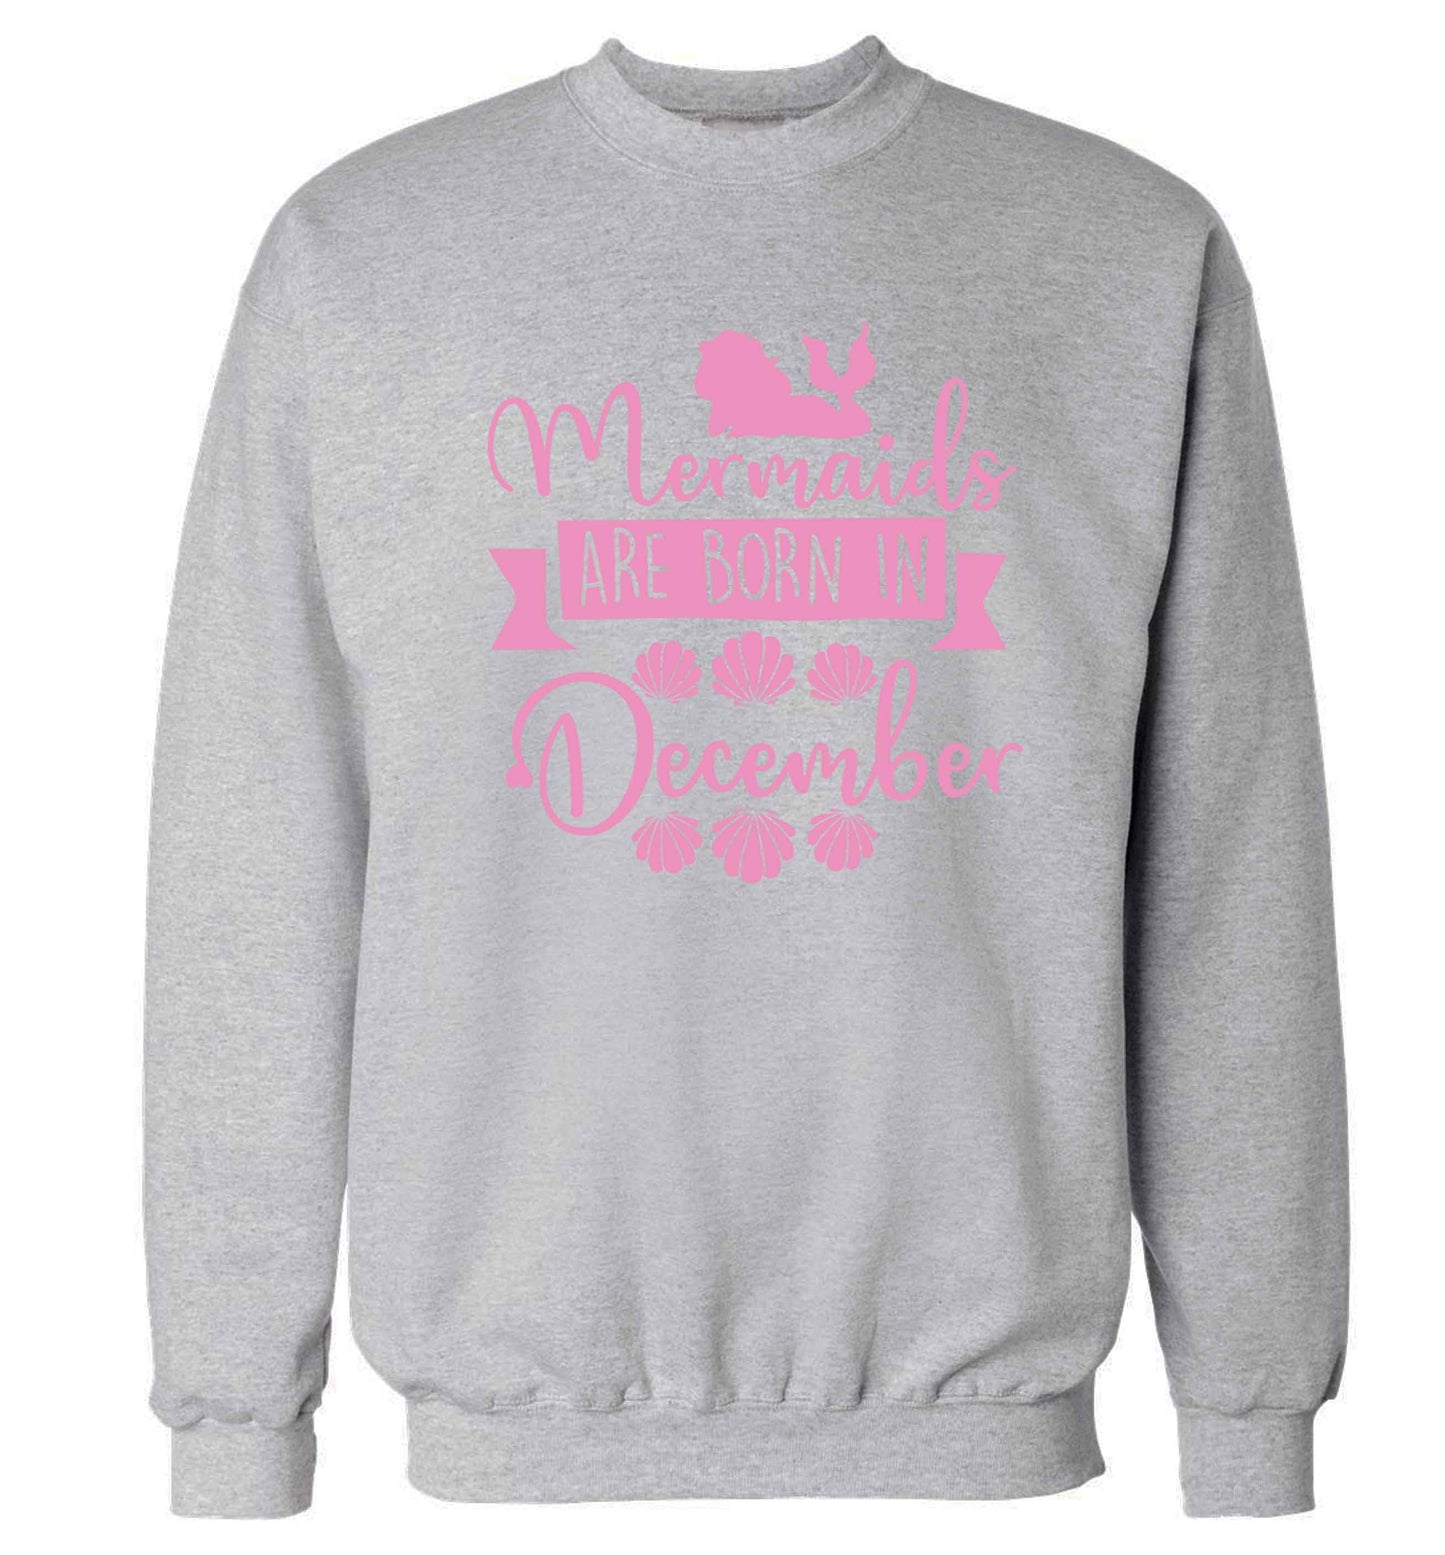 Mermaids are born in December Adult's unisex grey Sweater 2XL